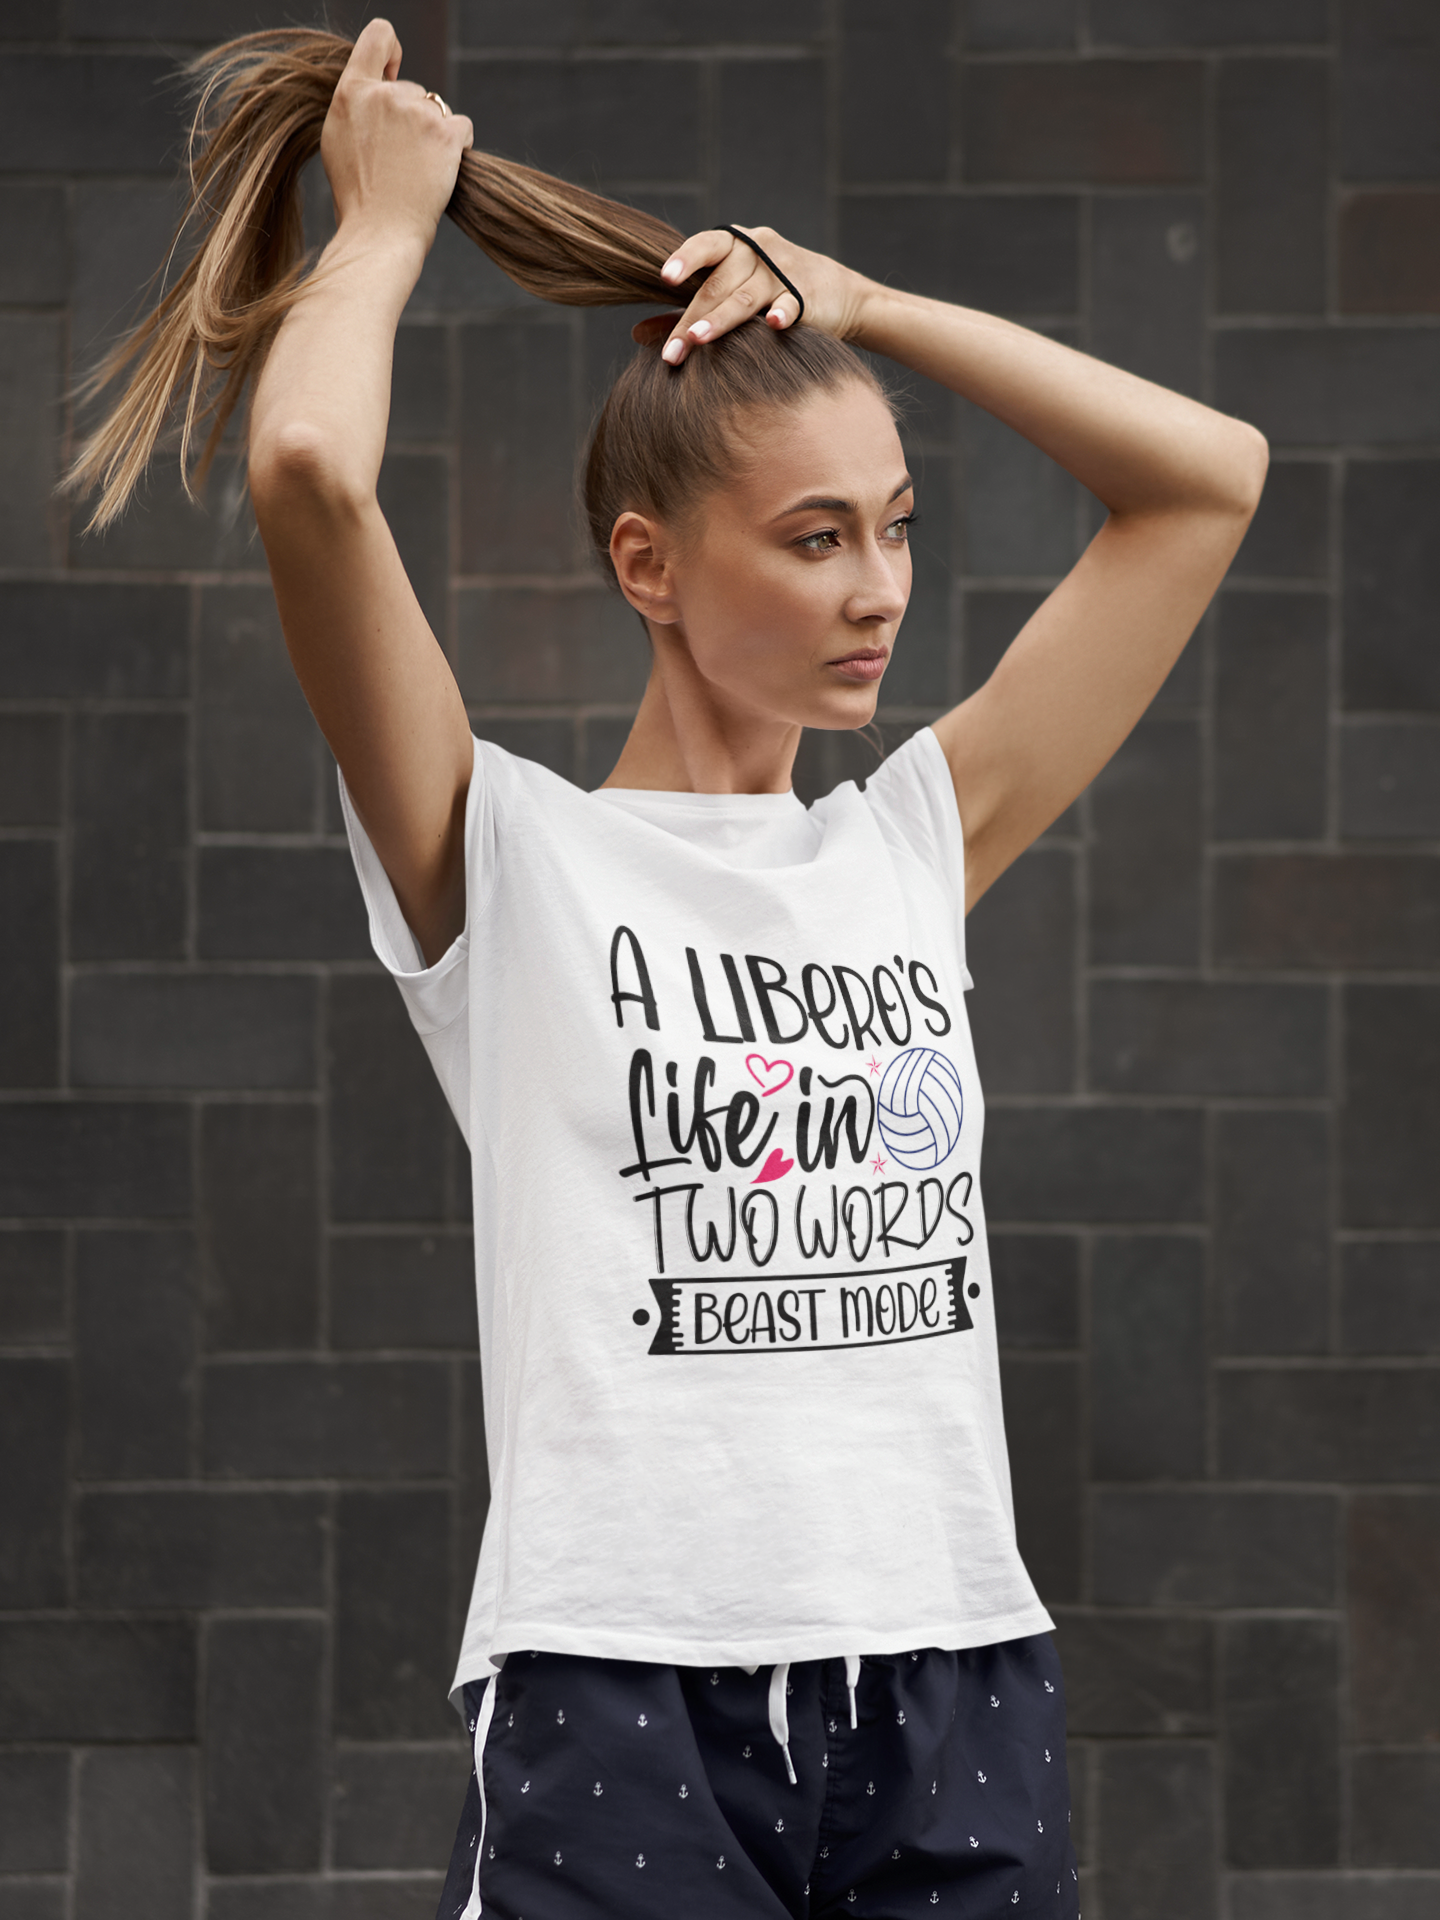 A Libero's Life in Two Words, Beast Mode Volleyball Shirt by Volleybragswag. Available in the Etsy Volleybragswag shop.